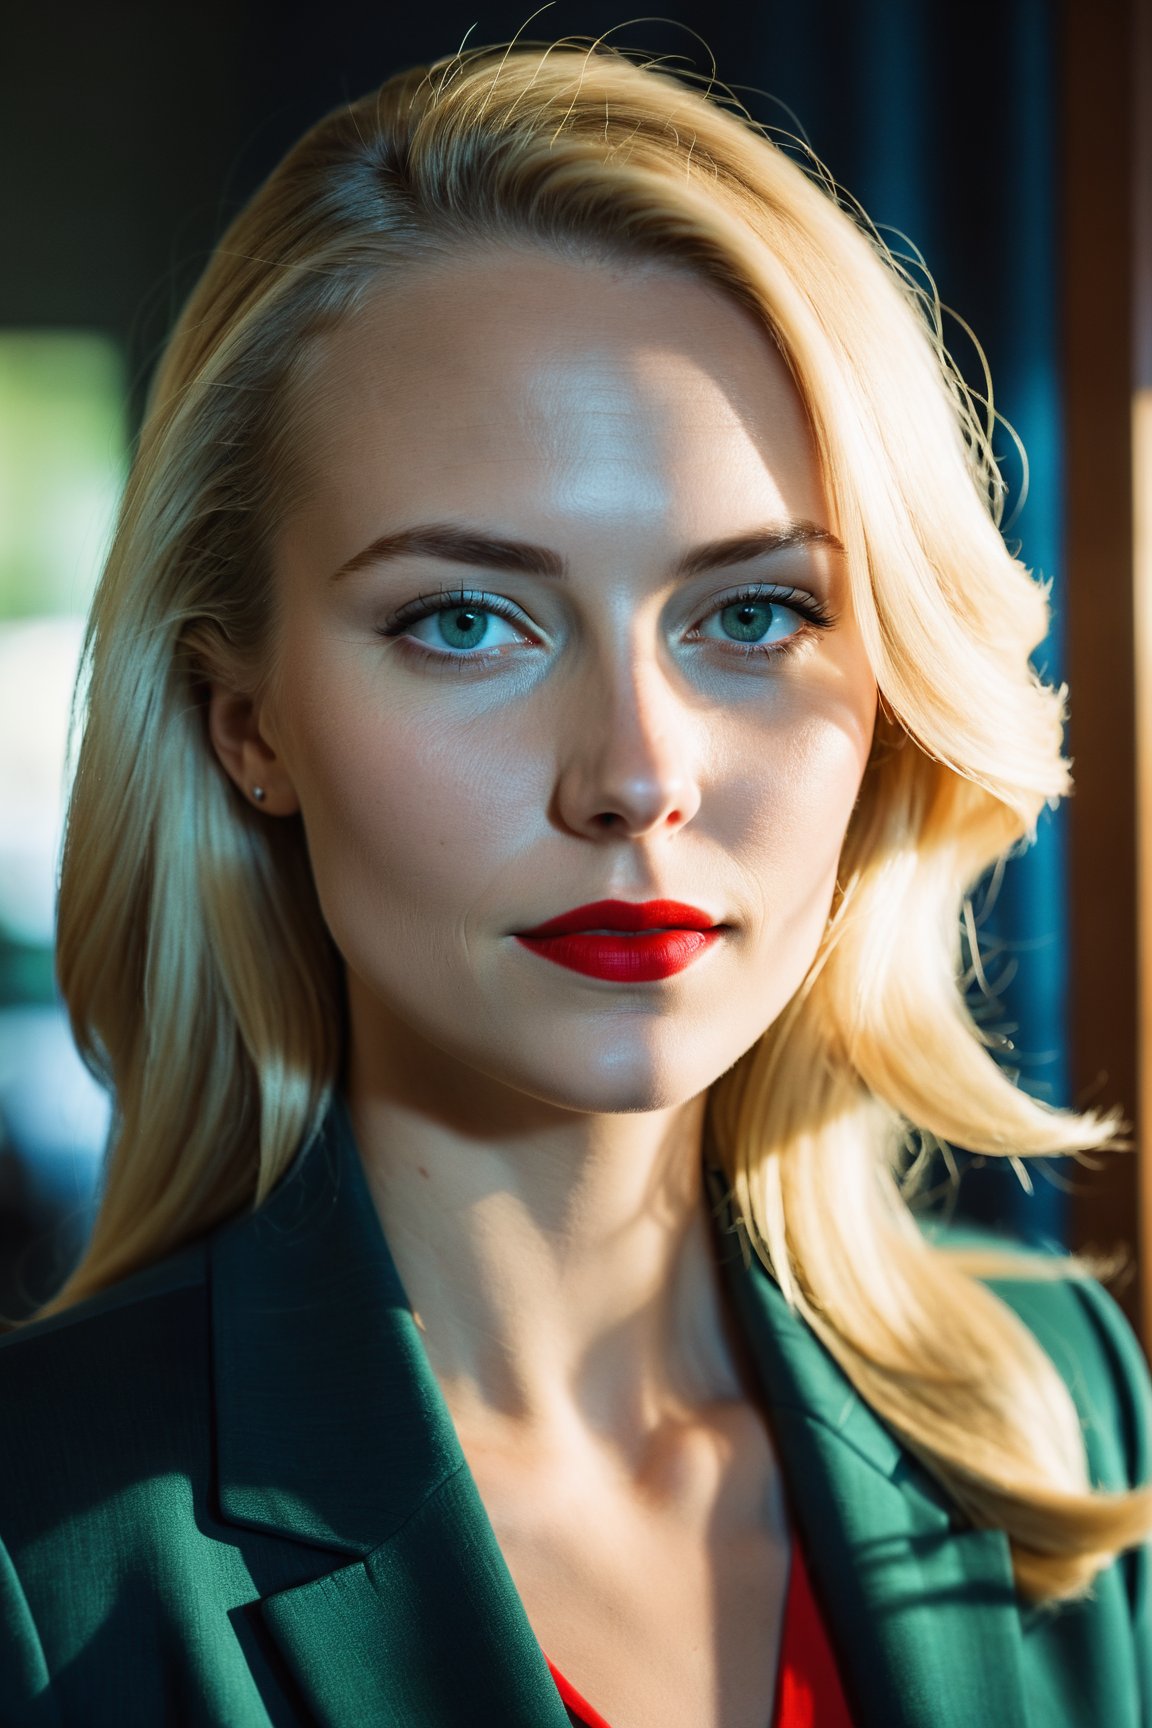 RAW photo, woman 30 y.o with long blonde hair, soft red lipstick, blue blazer, delicate featured face, thin and defined eyebrows, light green eyes, black t-shirt with a design of a female face, The background is interior and blurry. The lighting is soft and comes from a light window placed to the left of the model. The lens is a 90mm short telephoto lens with an aperture of f/2.8. The camera is a DSLR with a full format sensor. The exposure parameters are: ISO 100, shutter speed 1/125 s and white balance in automatic, moody, epic, gorgeous, film grain, grainy,